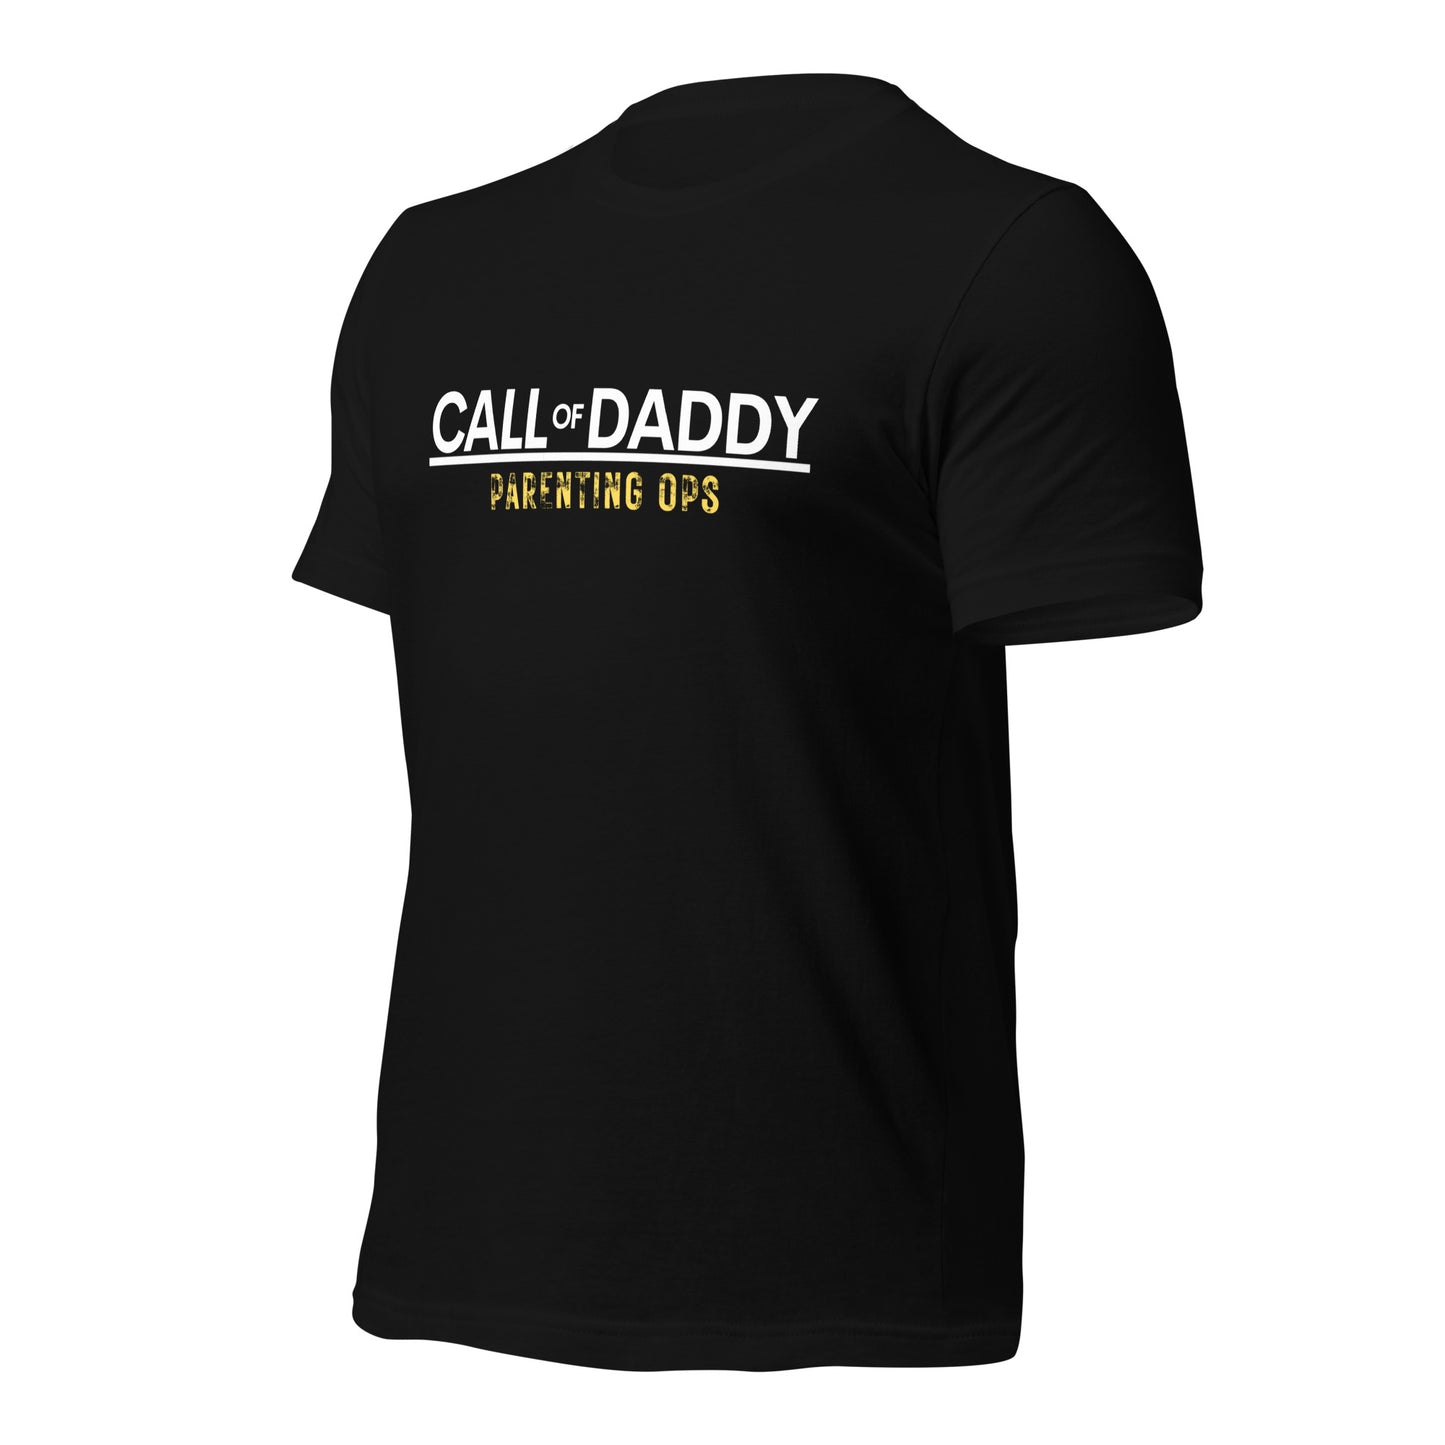 Call of Daddy Parenting Ops Black Tee